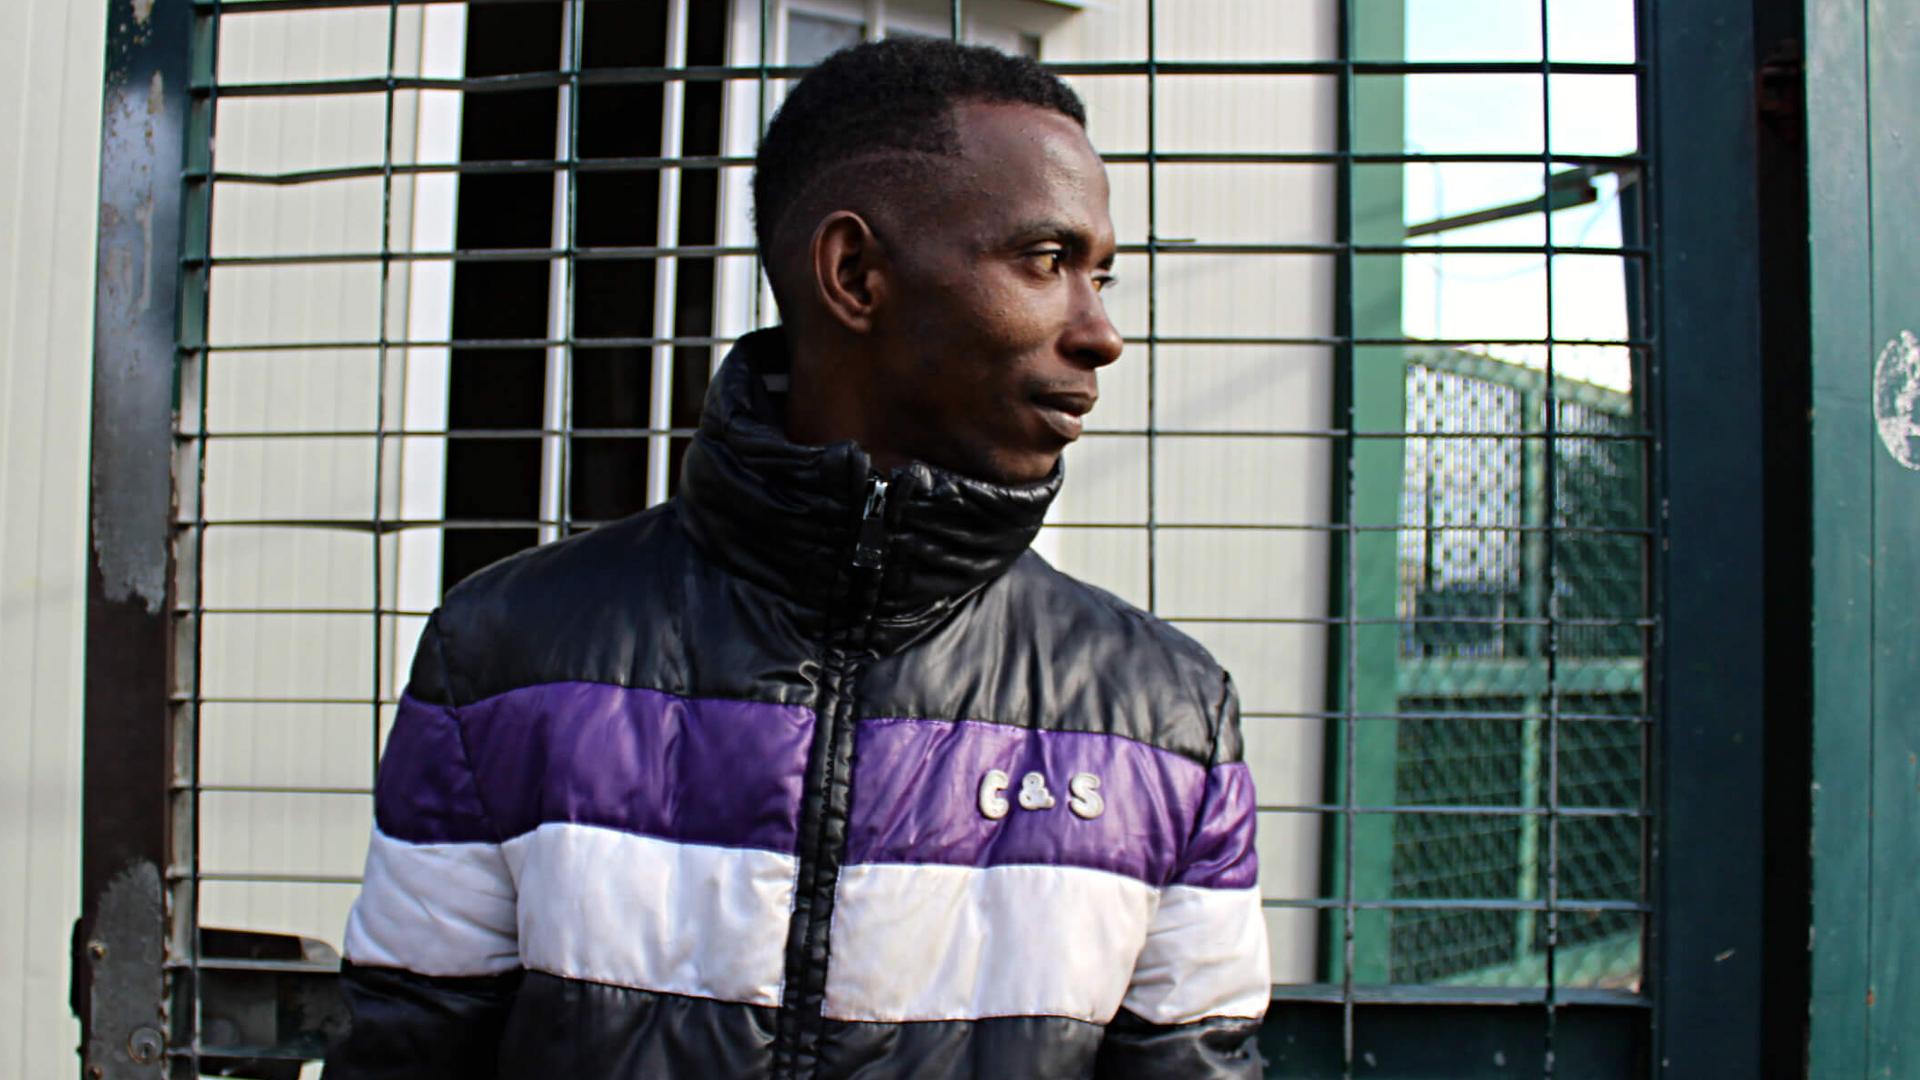 A young African man wearing a purple and white jacket stands and looks to the left. 